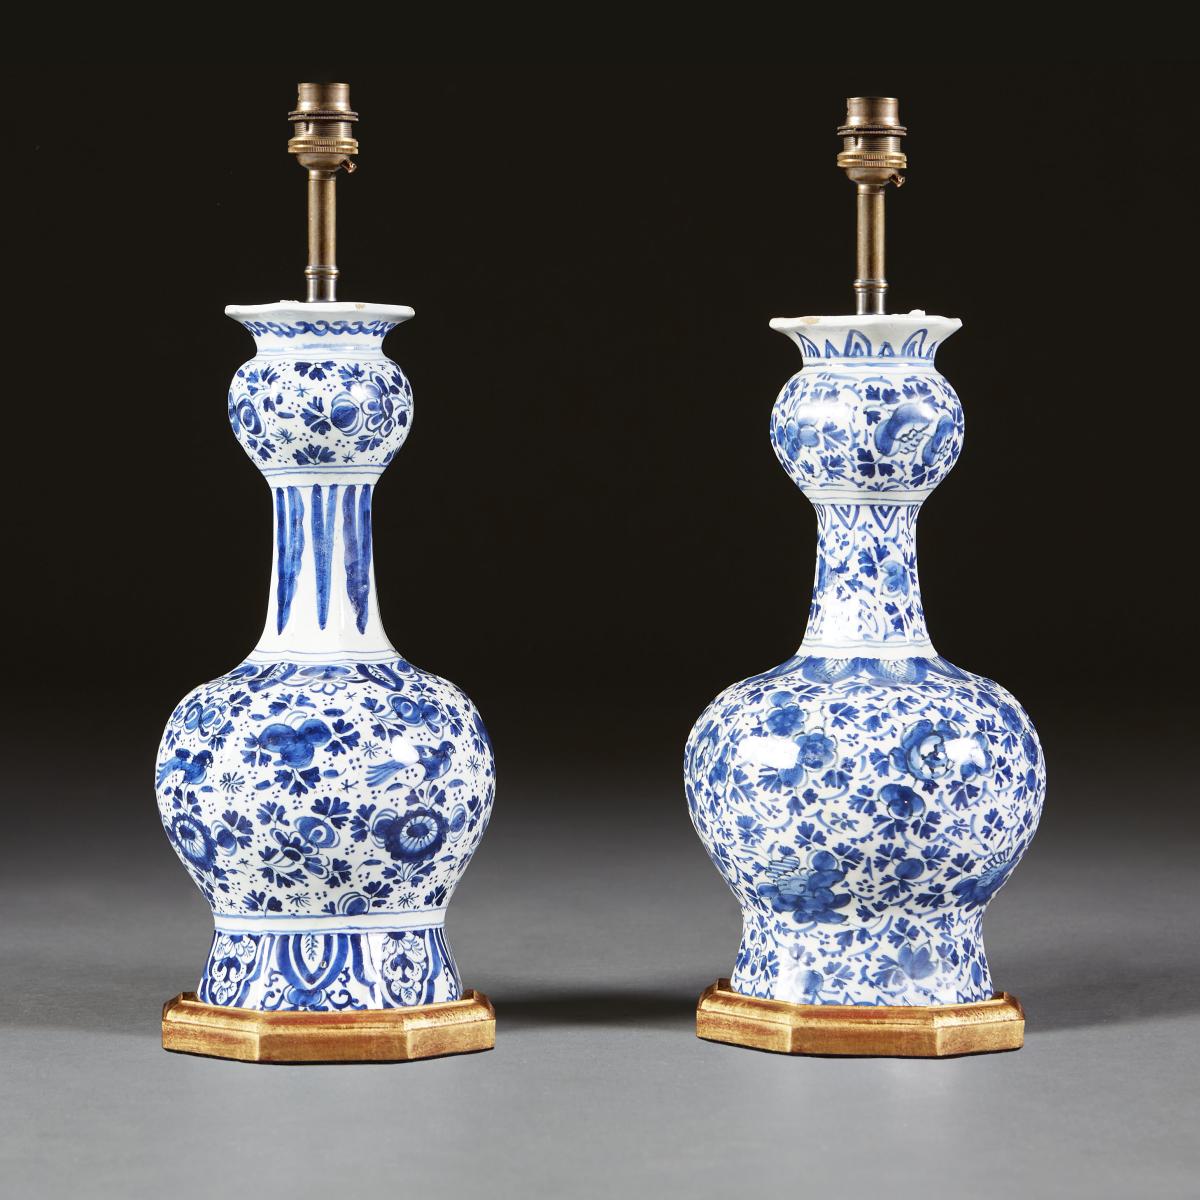 18th Century Delft Vases as Lamps